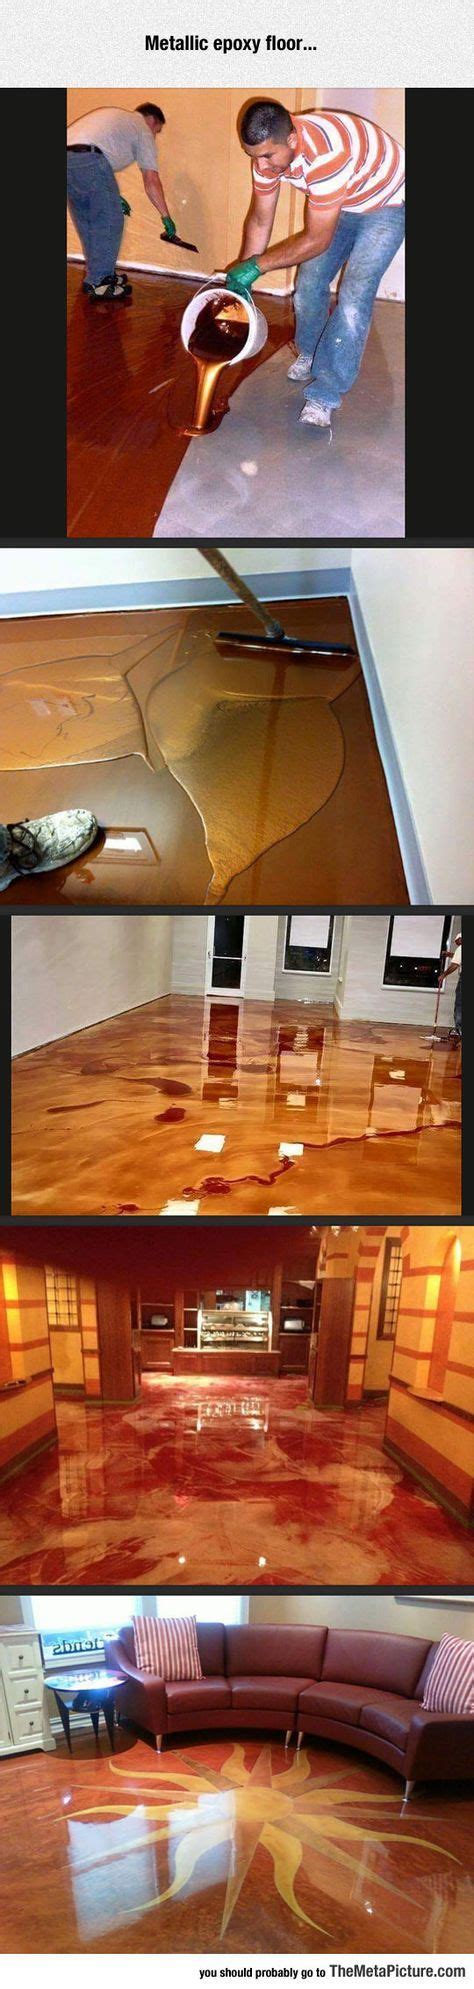 These are just a few of the advantages that count in favor 2 overview positive properties of floor coating with epoxy. 872 best Epoxy Flooring images on Pinterest | Floors ...